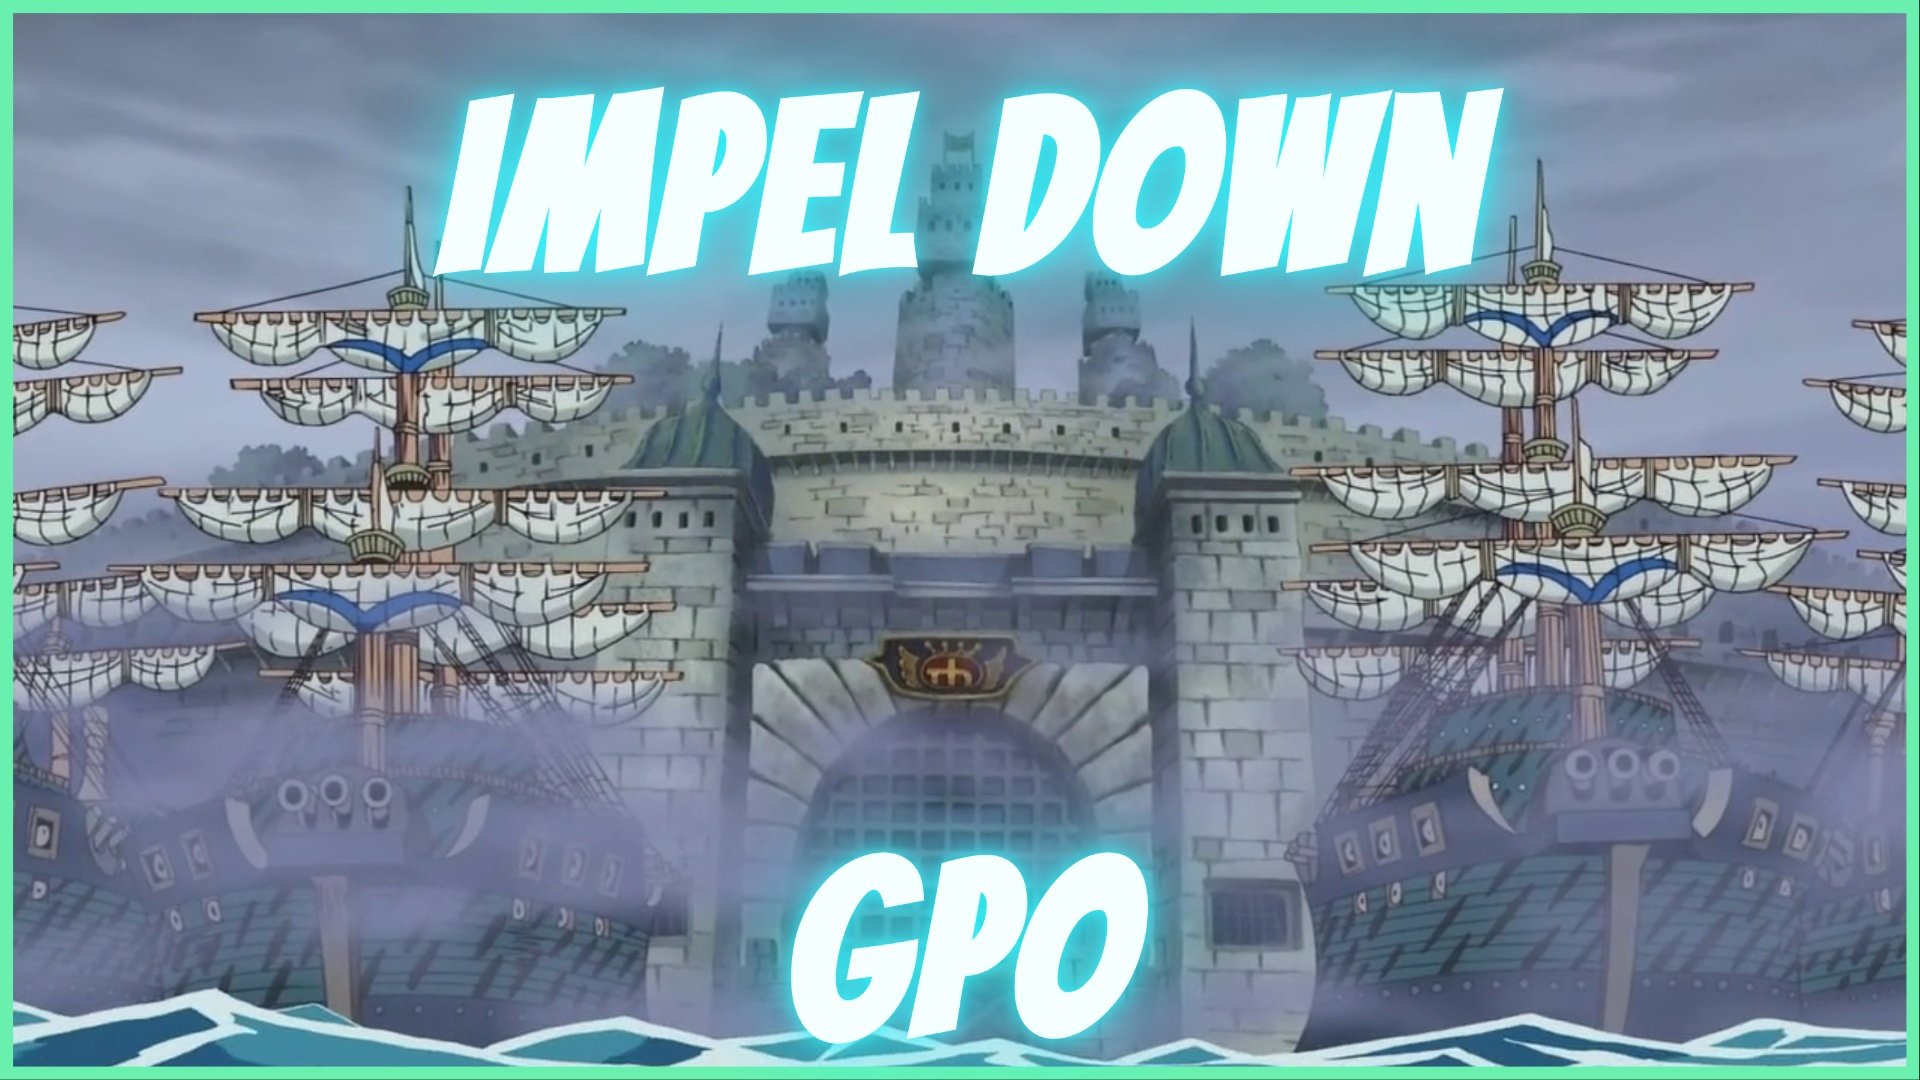 the image shows the impel down from within the one piece anime. This fortified island is a castle of stone and enemies. across the front in shiny blue text reads "impel down GPO"